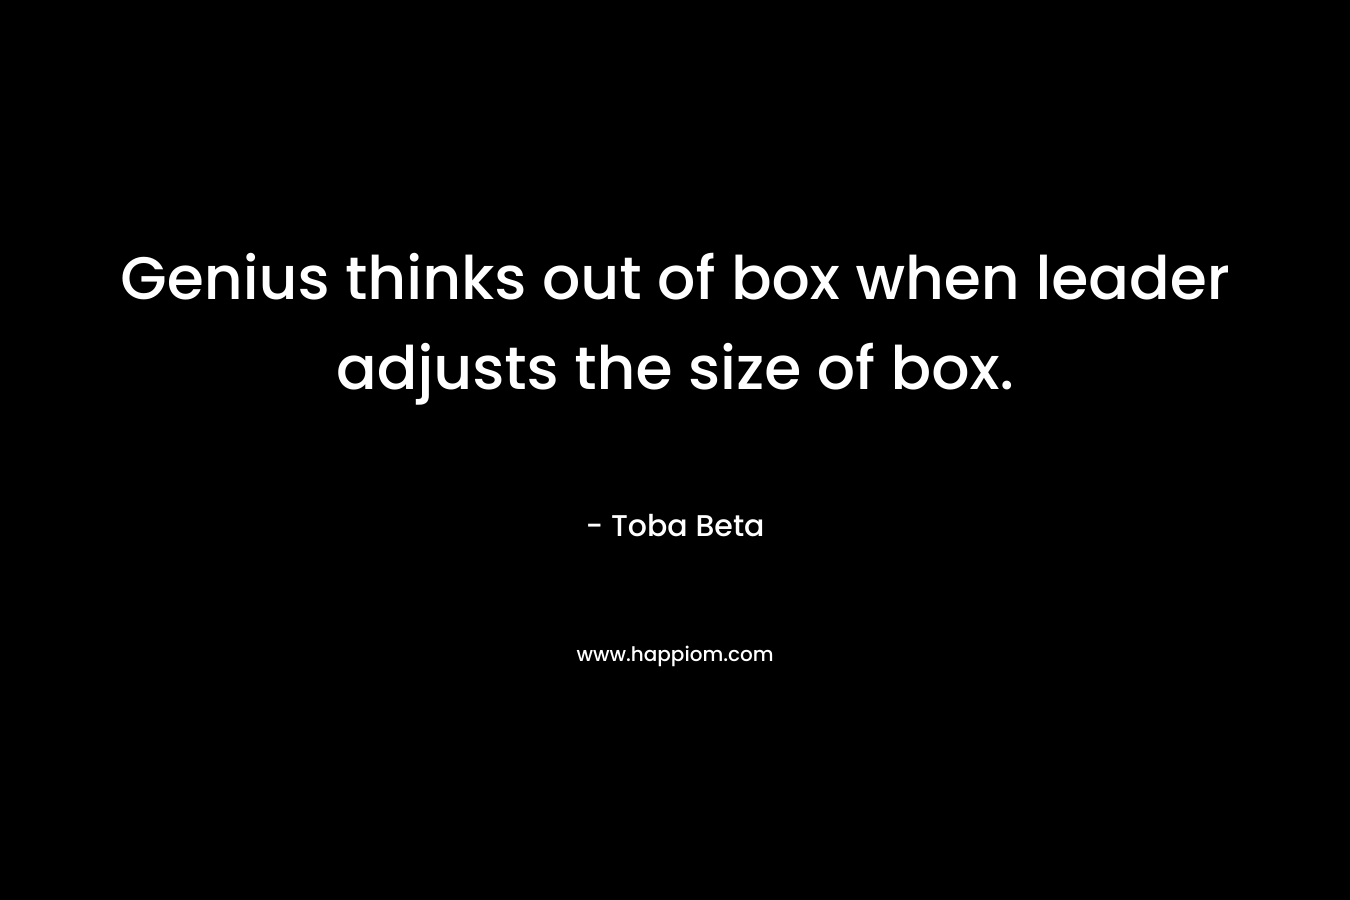 Genius thinks out of box when leader adjusts the size of box. – Toba Beta